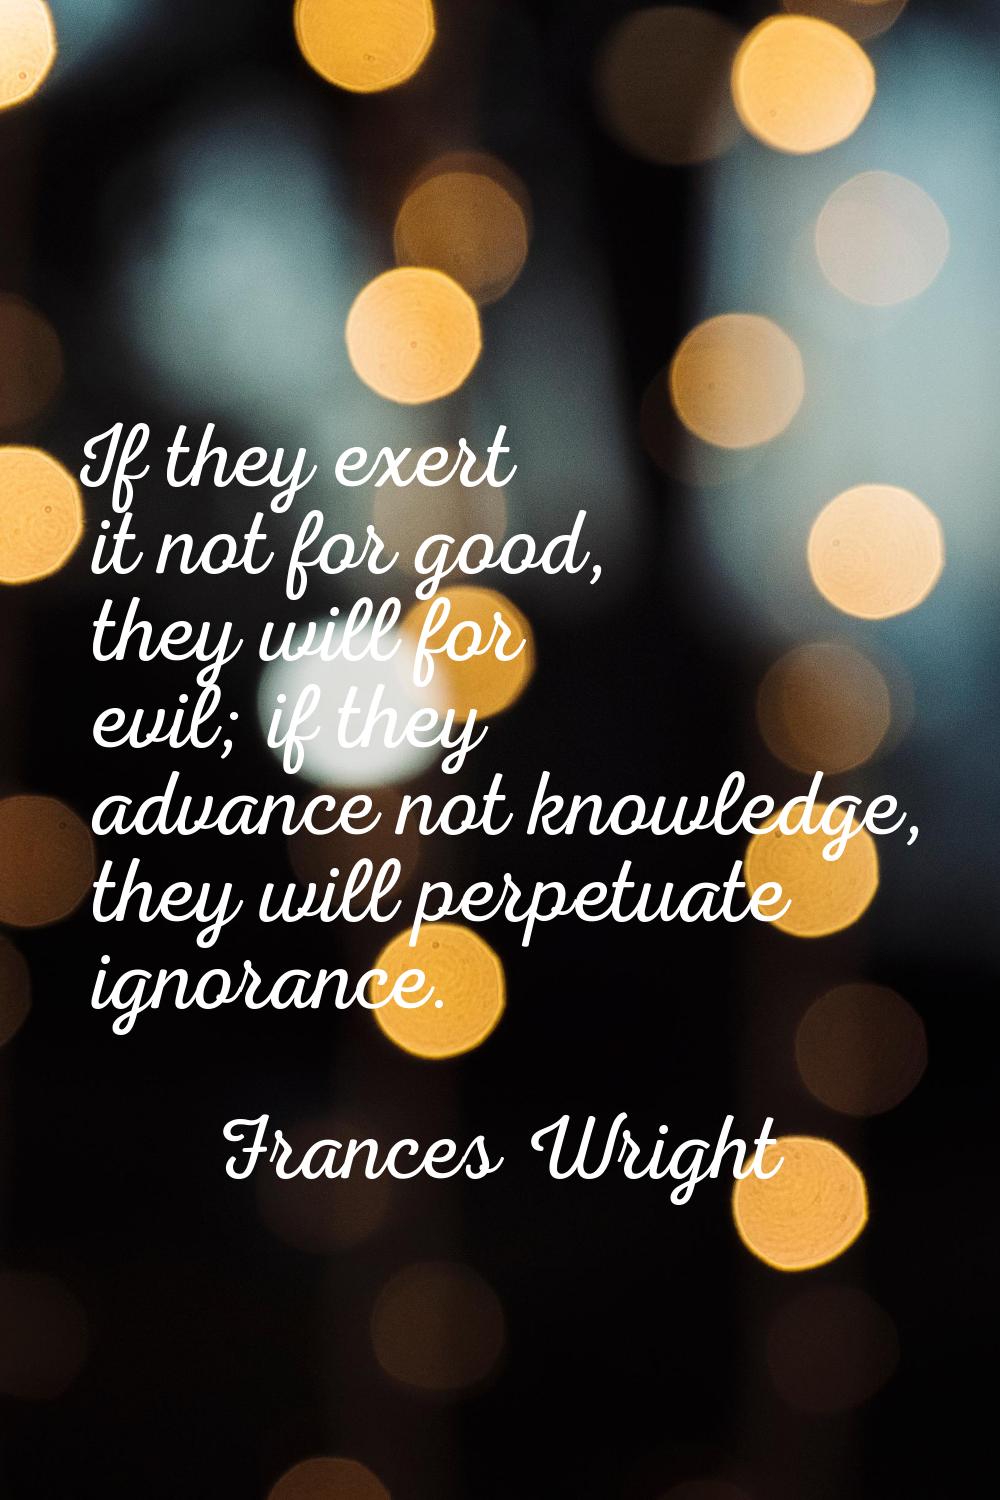 If they exert it not for good, they will for evil; if they advance not knowledge, they will perpetu